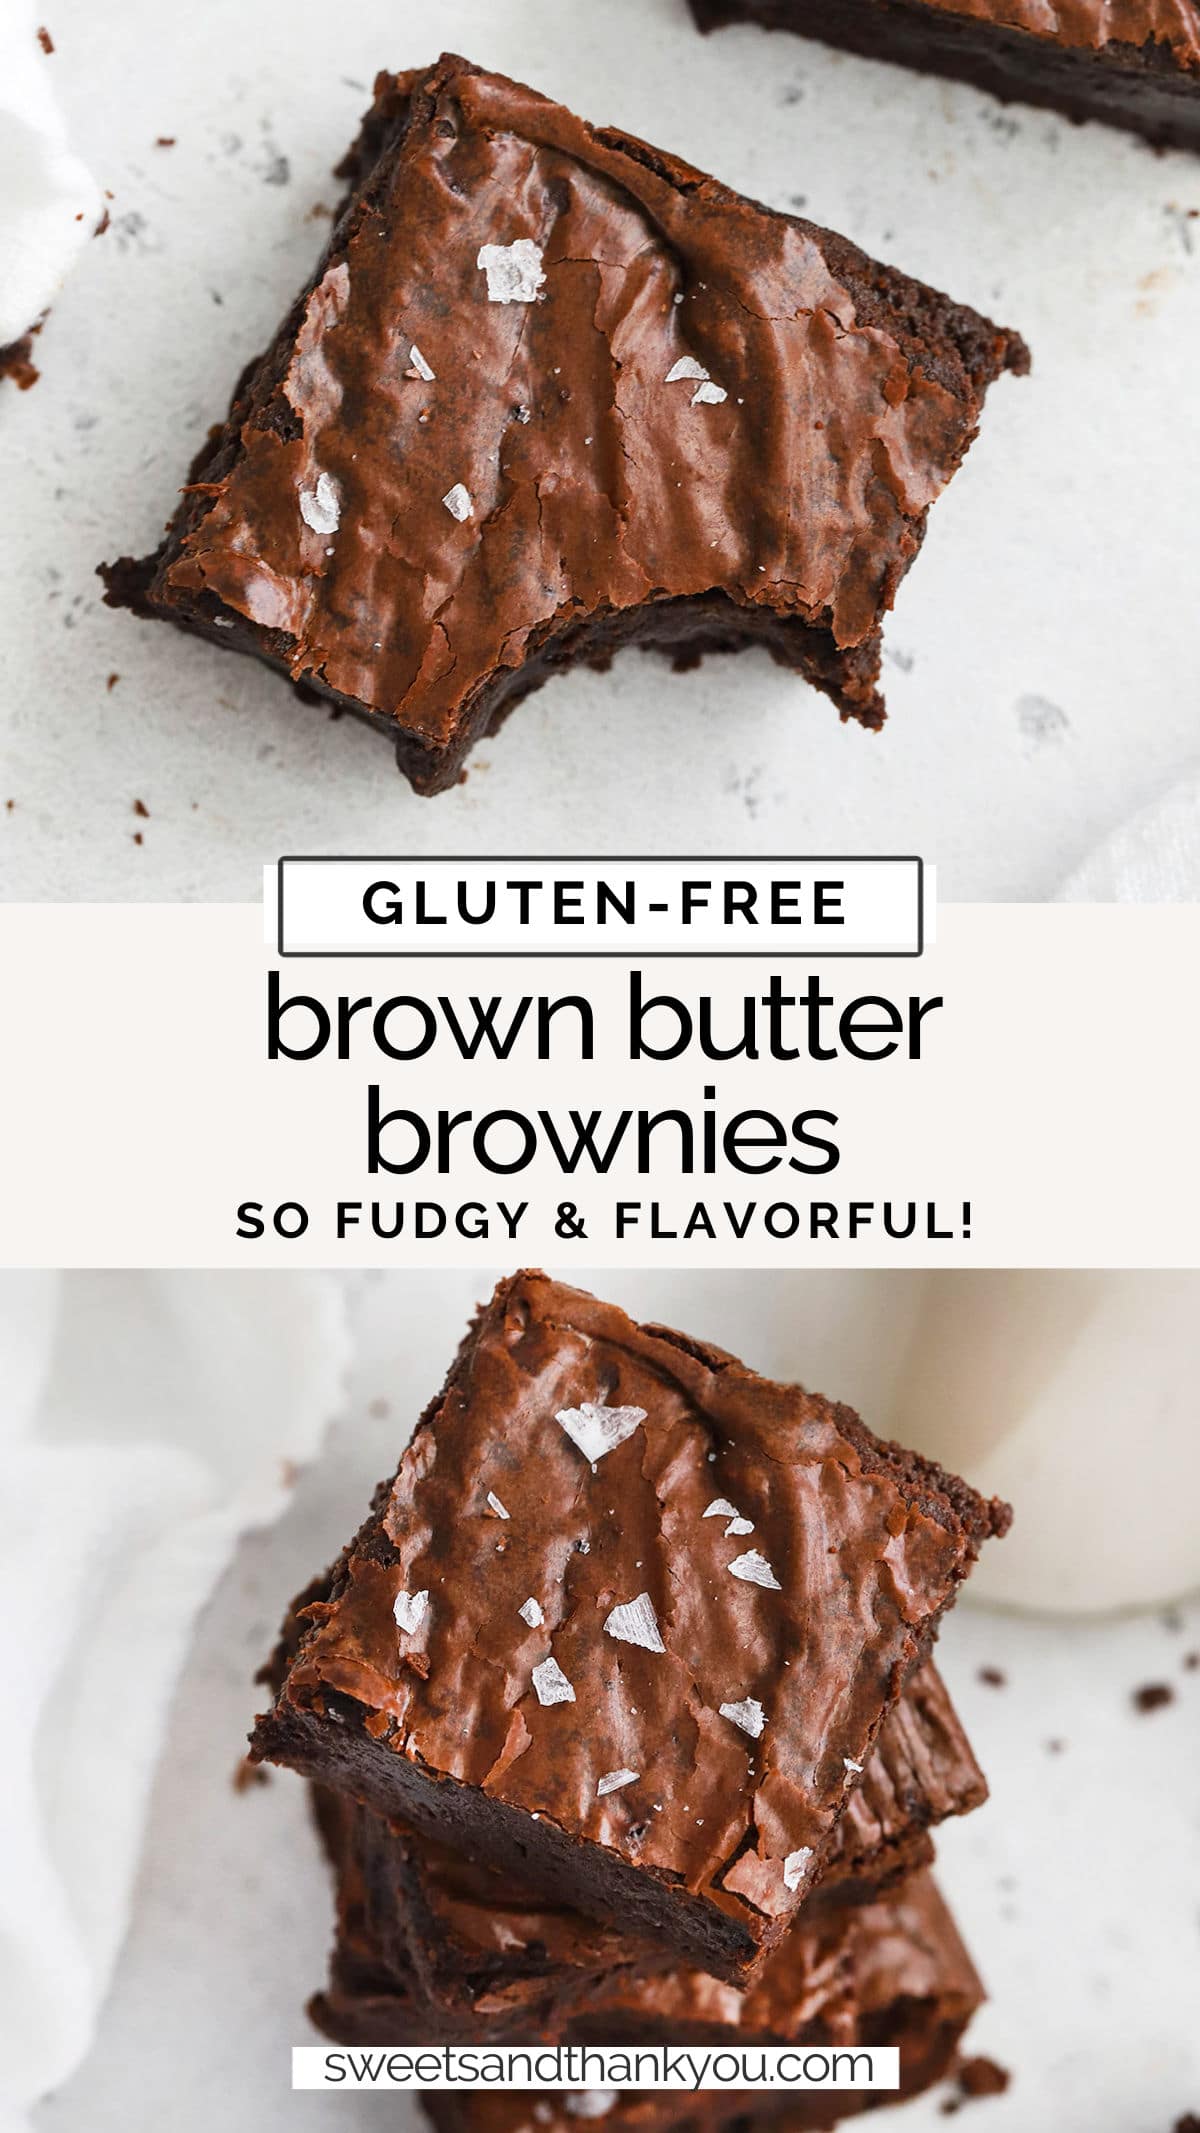 Gluten-Free Brown Butter Brownies - Fudgy gluten-free brownies that are perfect for a cozy day or chocolate craving. // Brown Butter Brownie Recipe // Gluten Free Brownies // Gluten-Free Baking // Easy gluten-free brownies // gluten free brownie recipe // gluten-free brownies with crackly tops